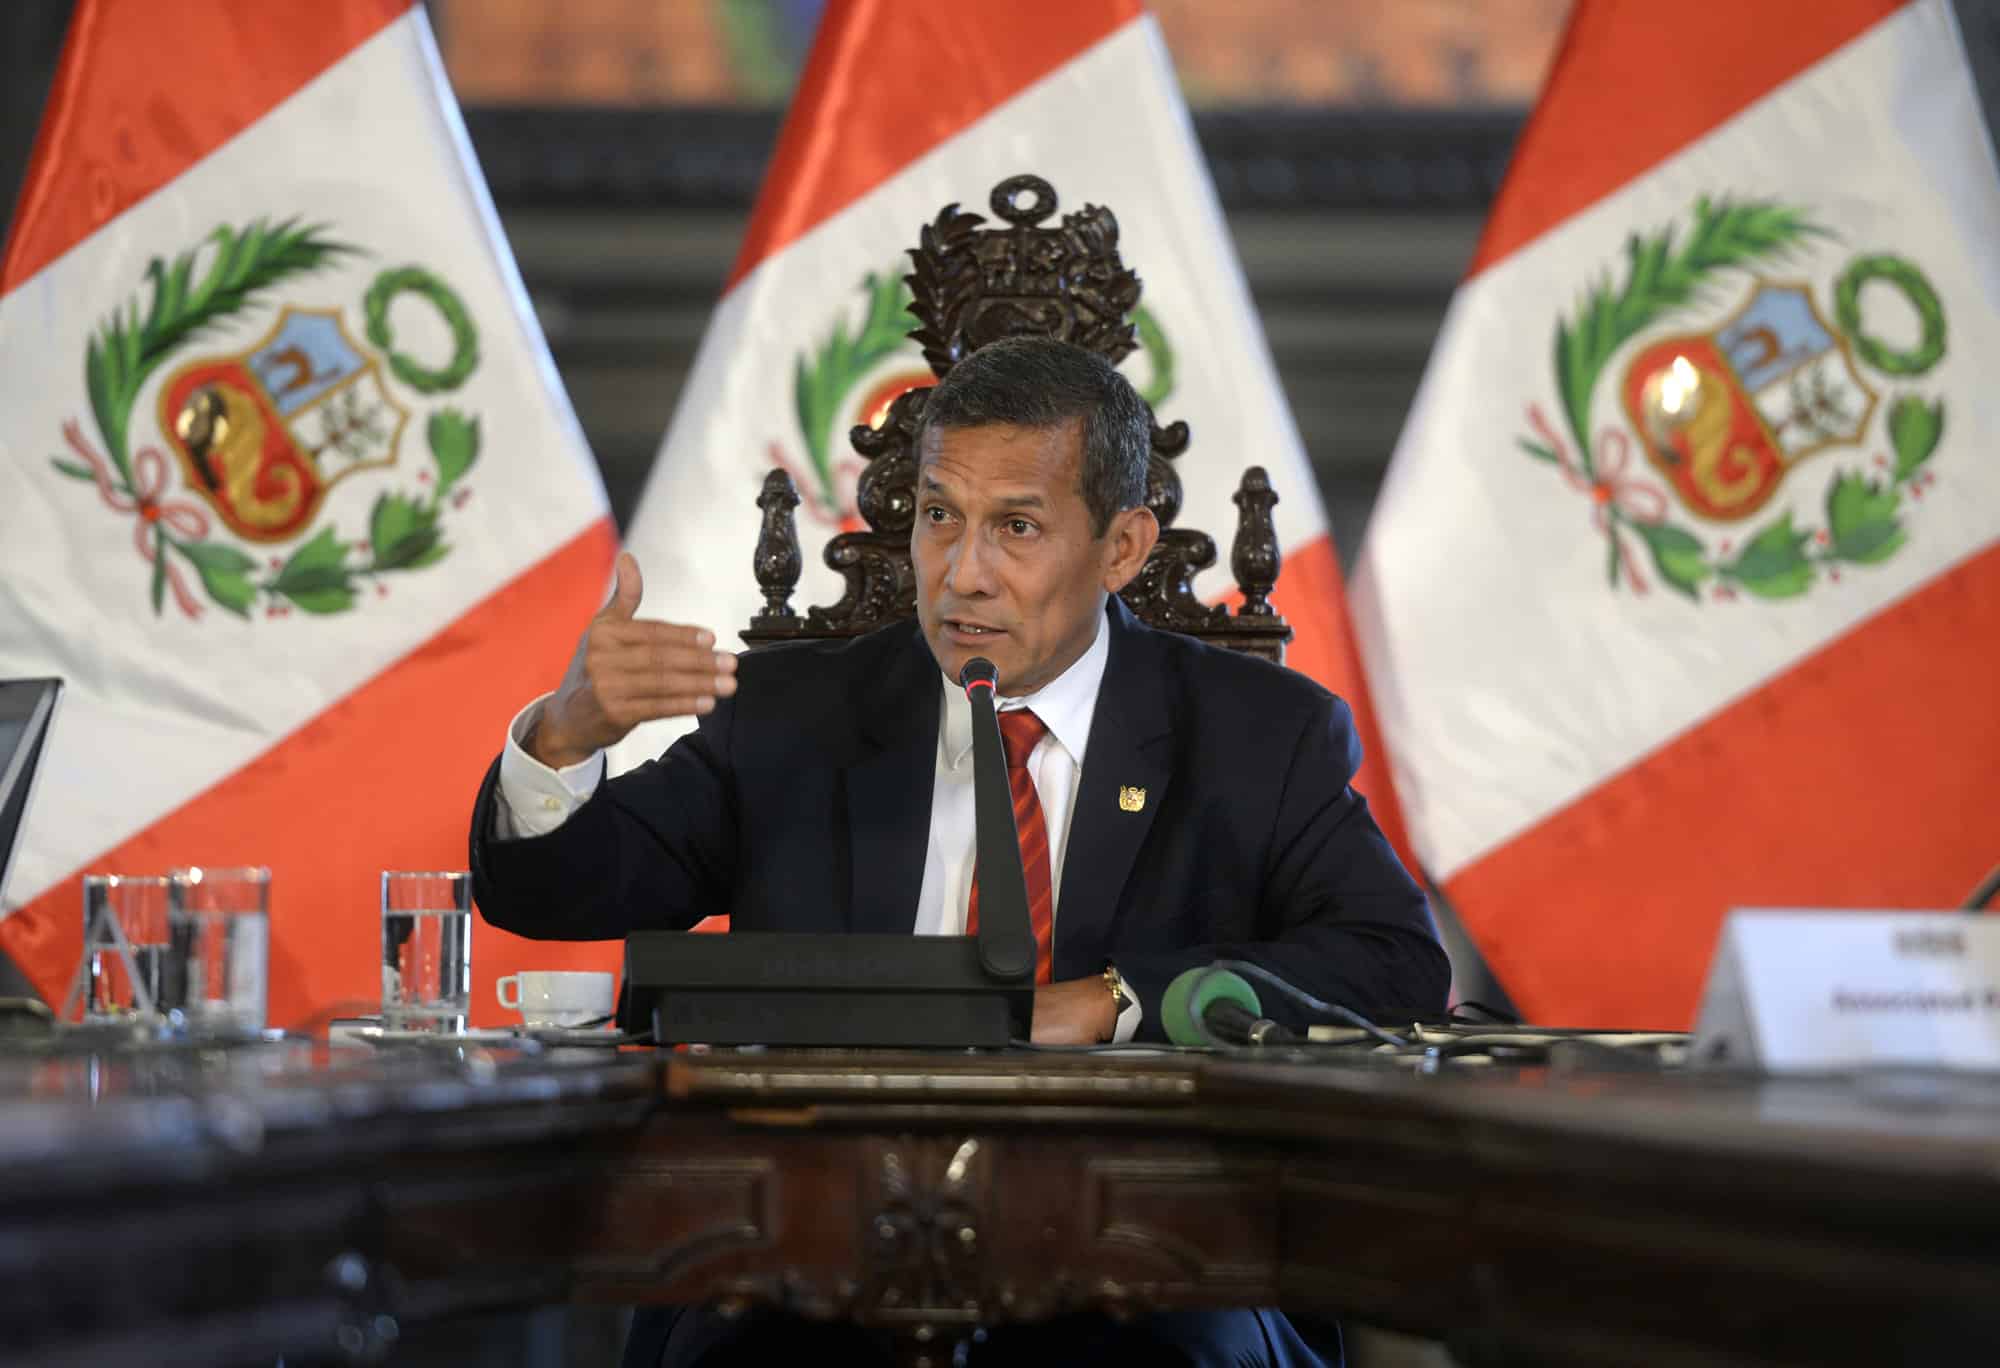 Peruvian President Ollanta Humala speaks during a press conference with the foreign press, in his office at the presidential palace in Lima on March 2, 2015.